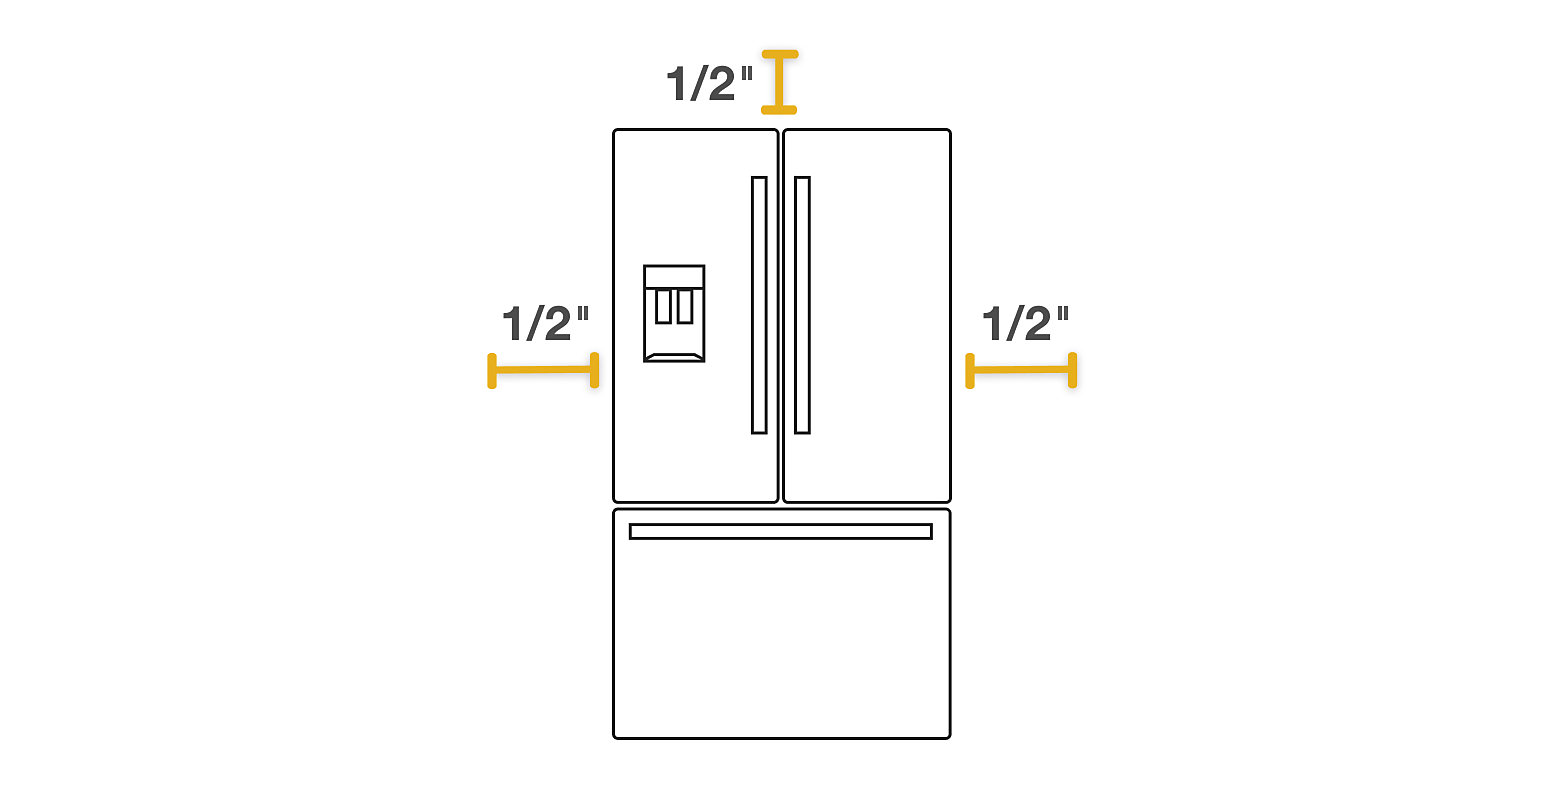 French Door refrigerator with 1/2 inch of space diagrammed on each side for proper placement